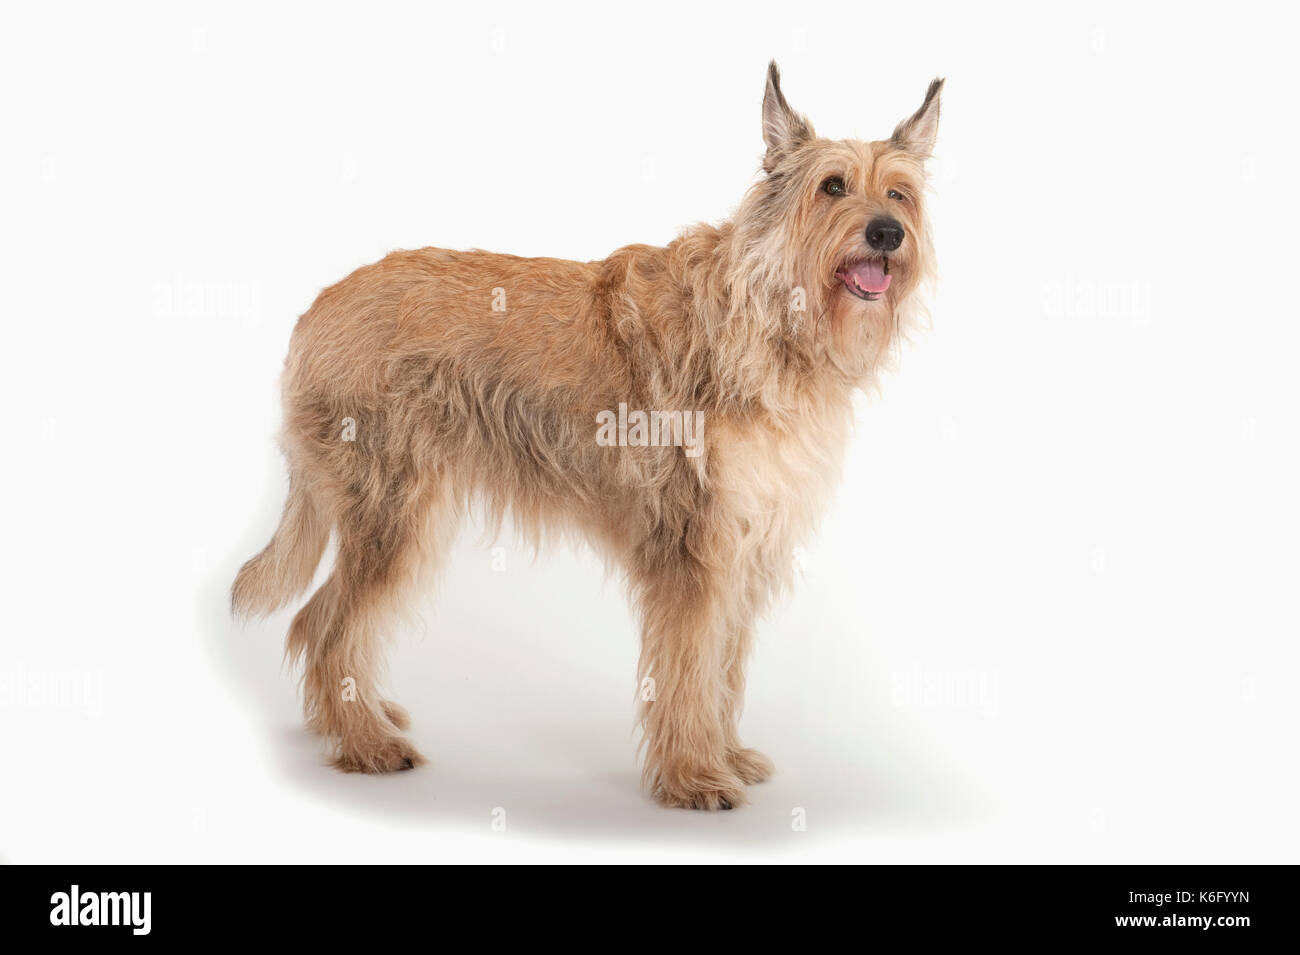 Berger Picard Dog, Standing, Studio, White Background Stock Photo